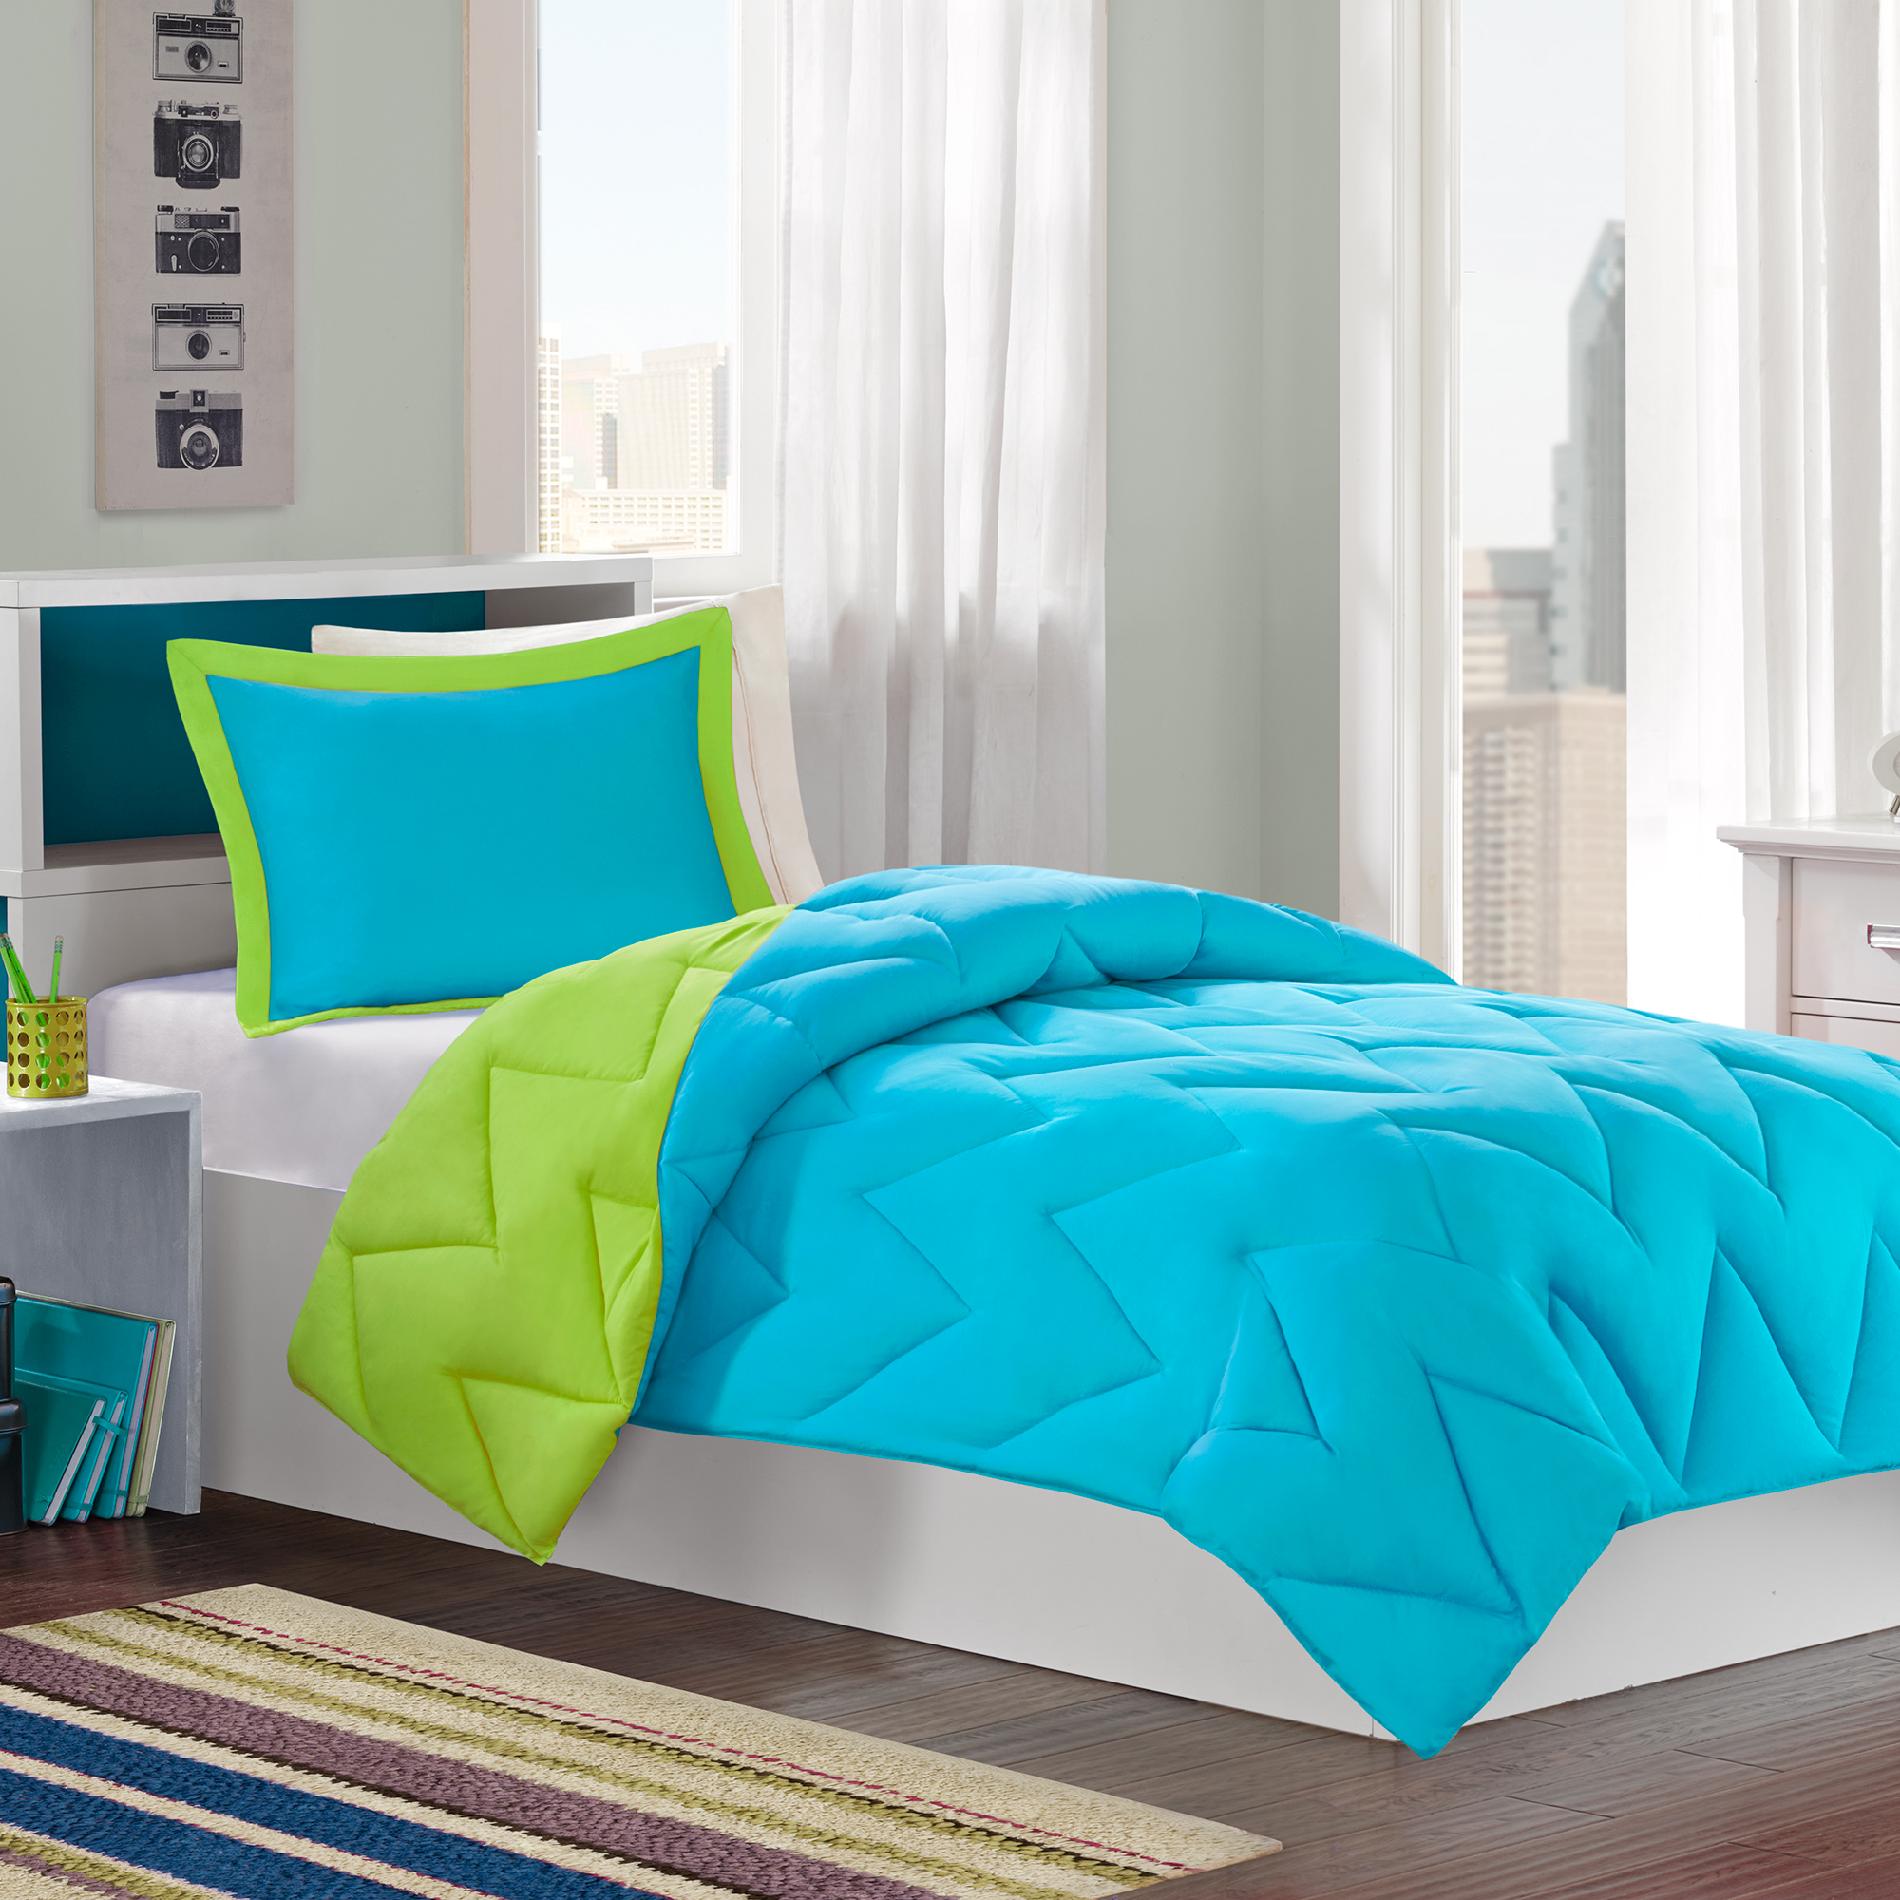 Colormate Turquoise/Lime Reversible Mini Bed Set - 3 Pieces